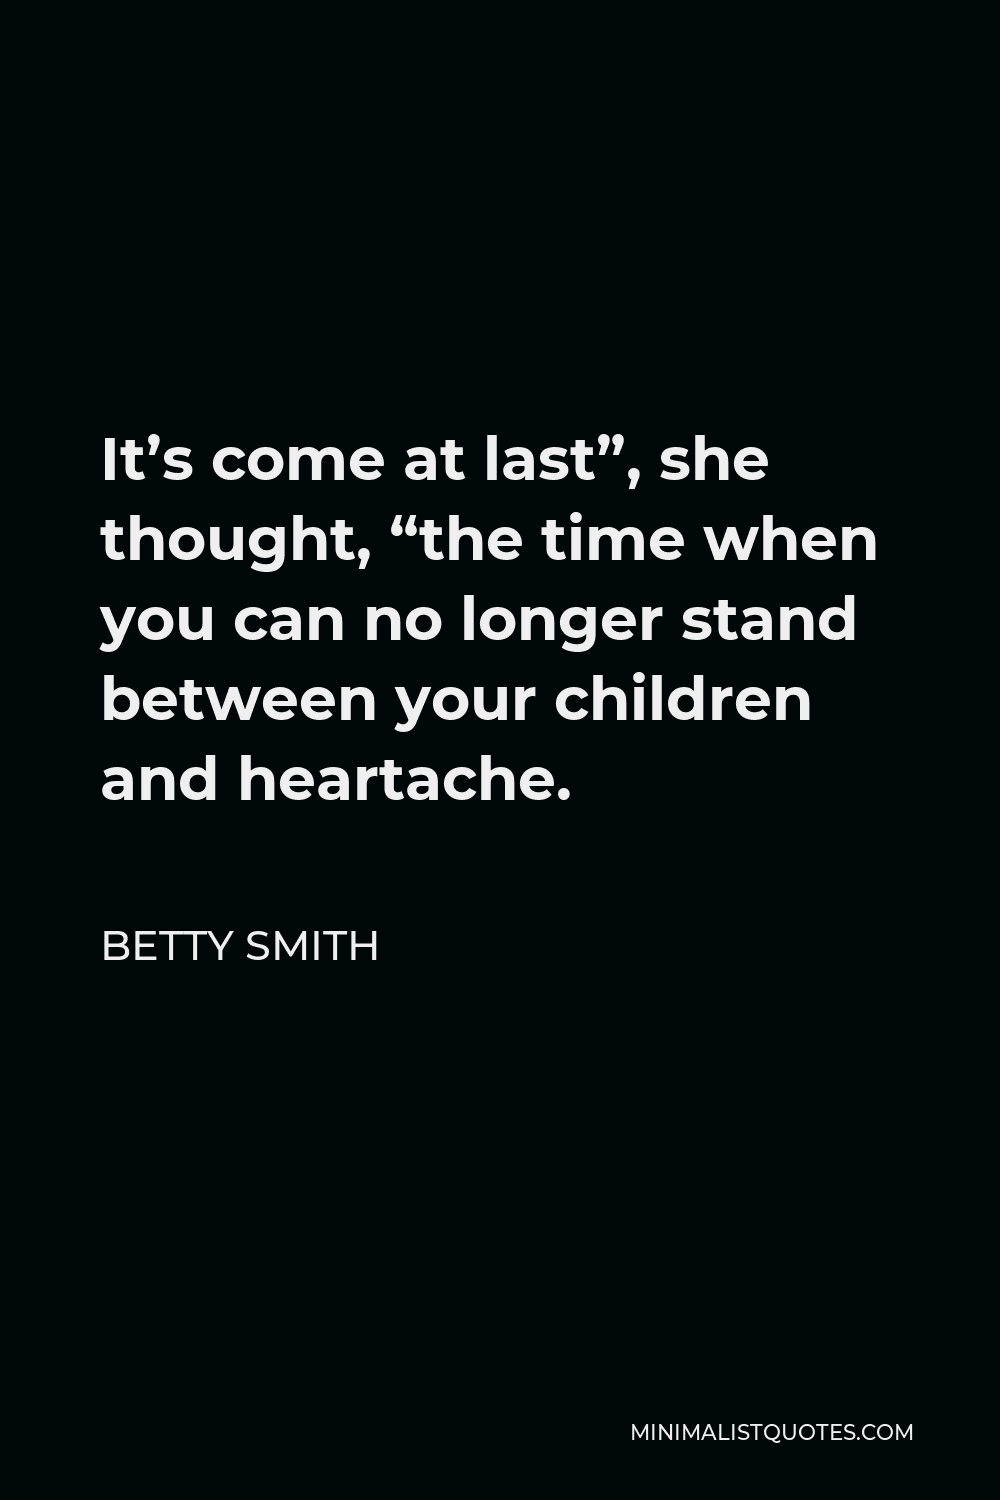 Betty Smith Quote - It’s come at last”, she thought, “the time when you can no longer stand between your children and heartache.